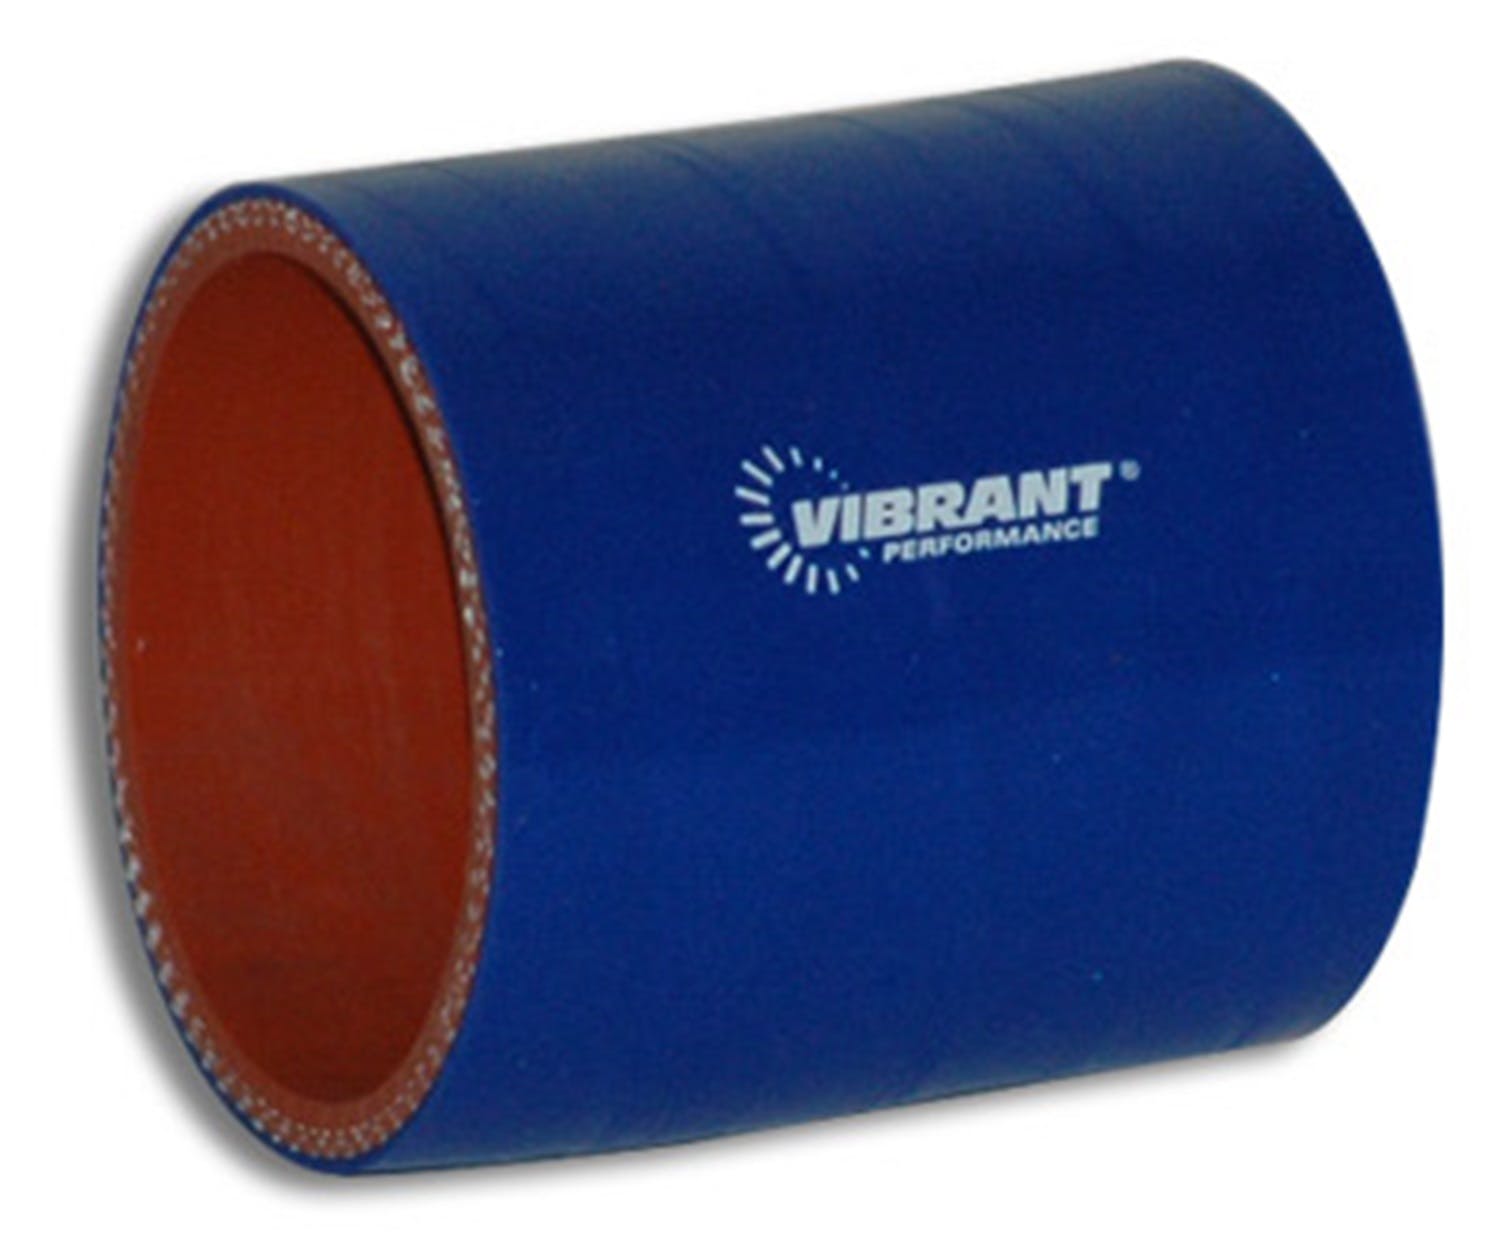 Vibrant Performance 2708B 4 Ply Silicone Sleeve, 2.25 inch I.D. x 3 inch Long - Blue